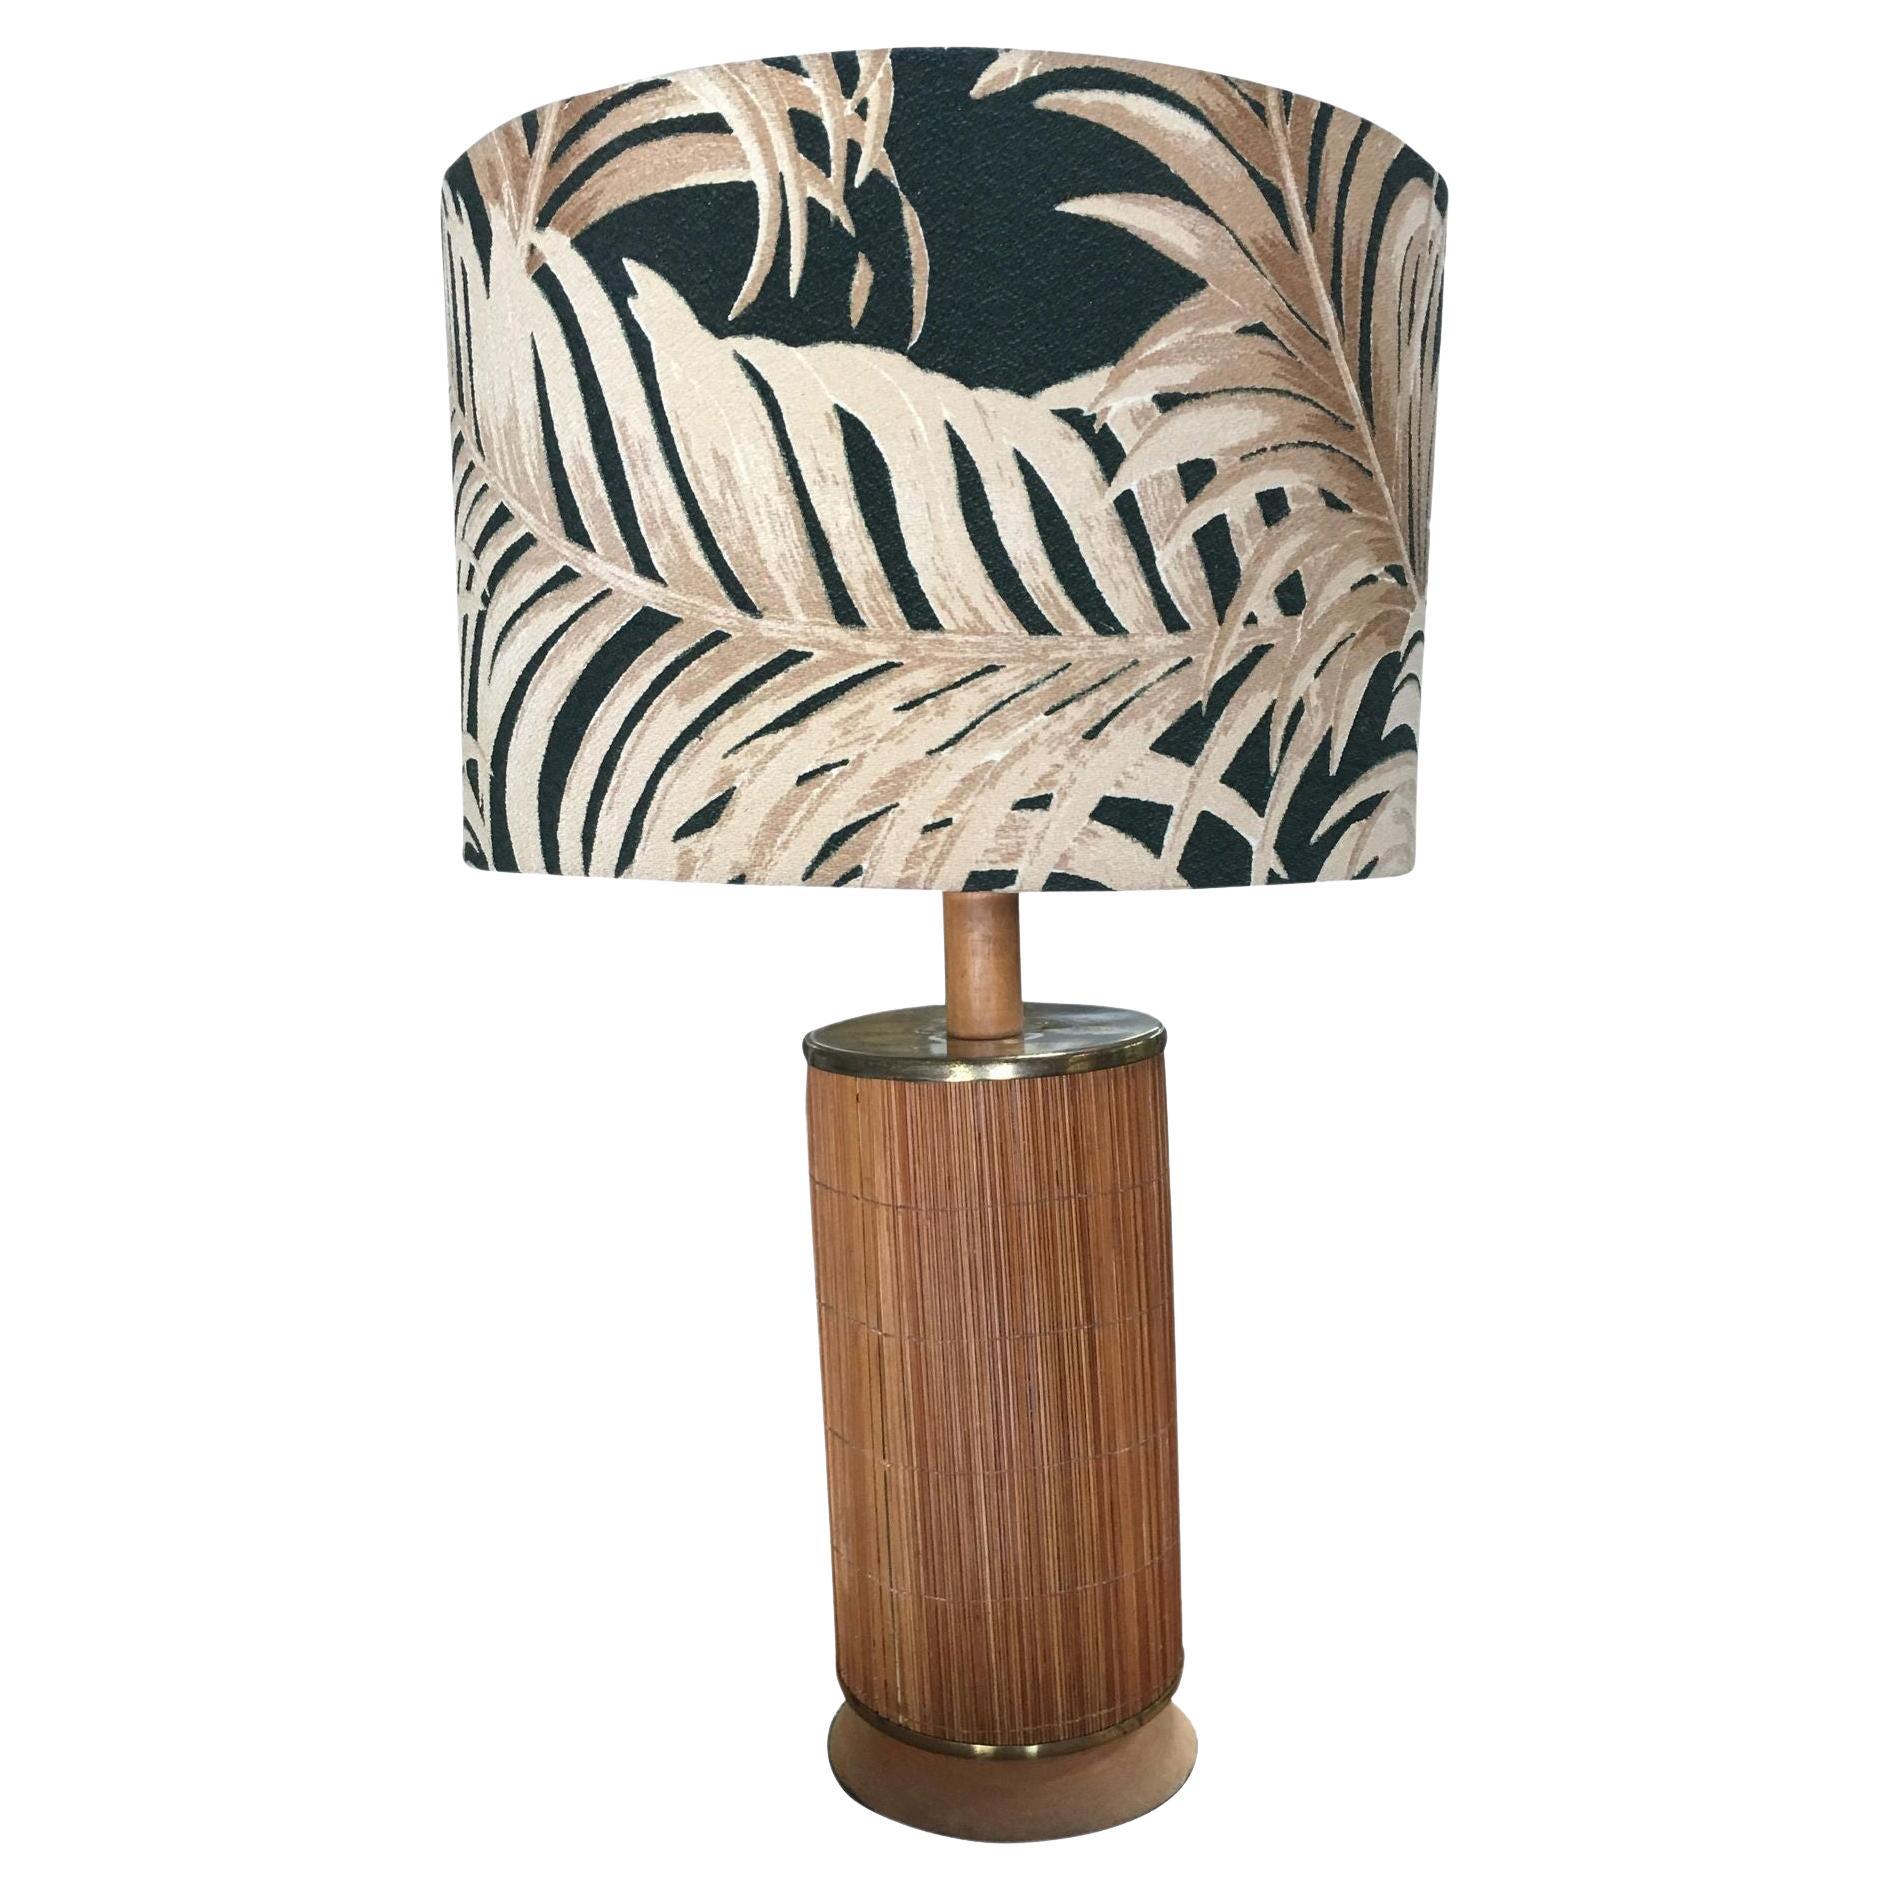 Restored Midcentury Bamboo Tropical Lamp with Fabric Palm Leaf